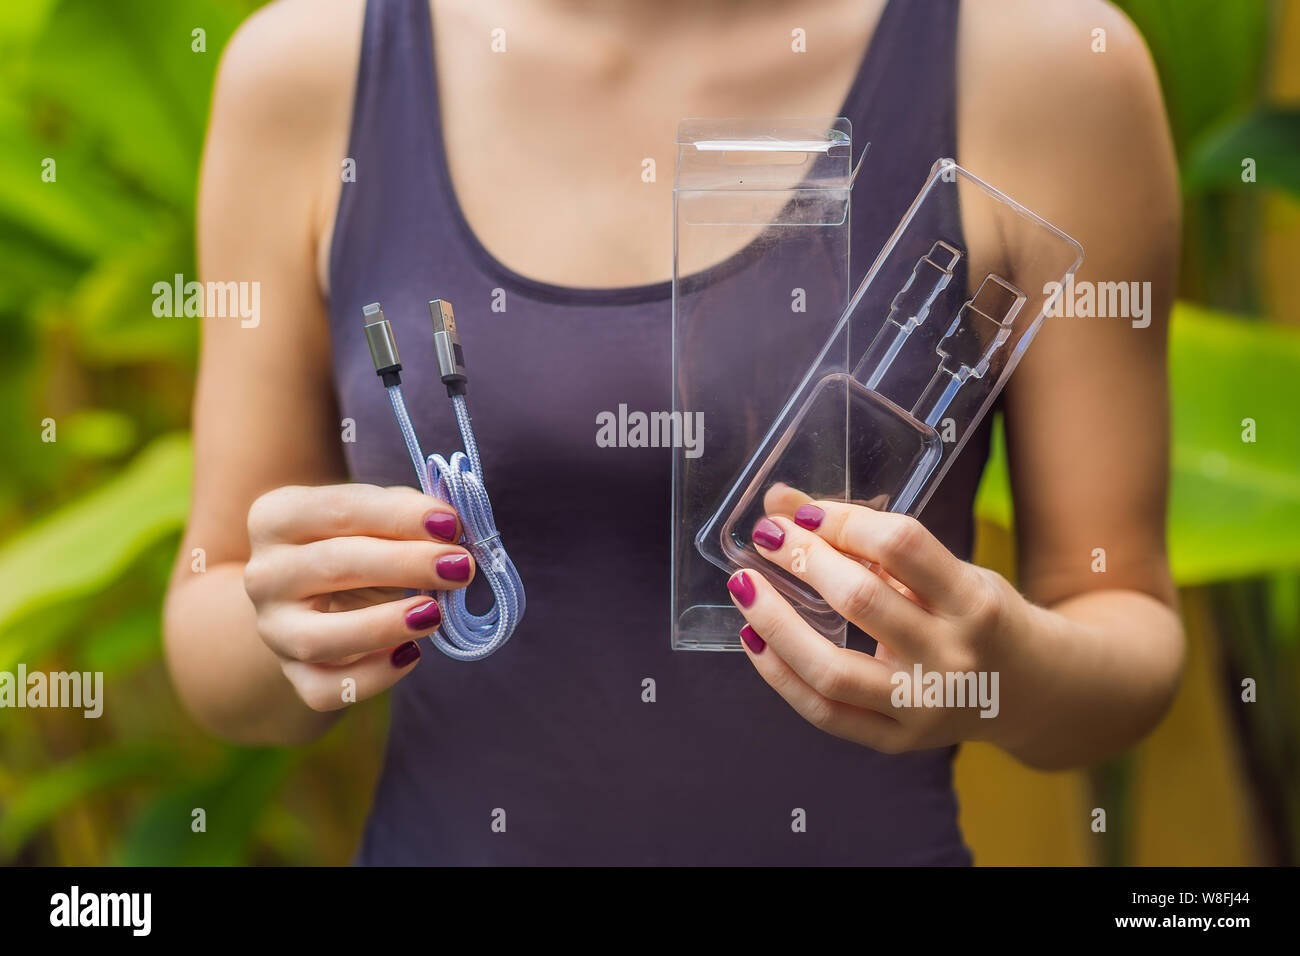 Female hands printed a new wire to charge the phone. The wire was packed in a large number of plastic packaging, which will be thrown into the trash Stock Photo